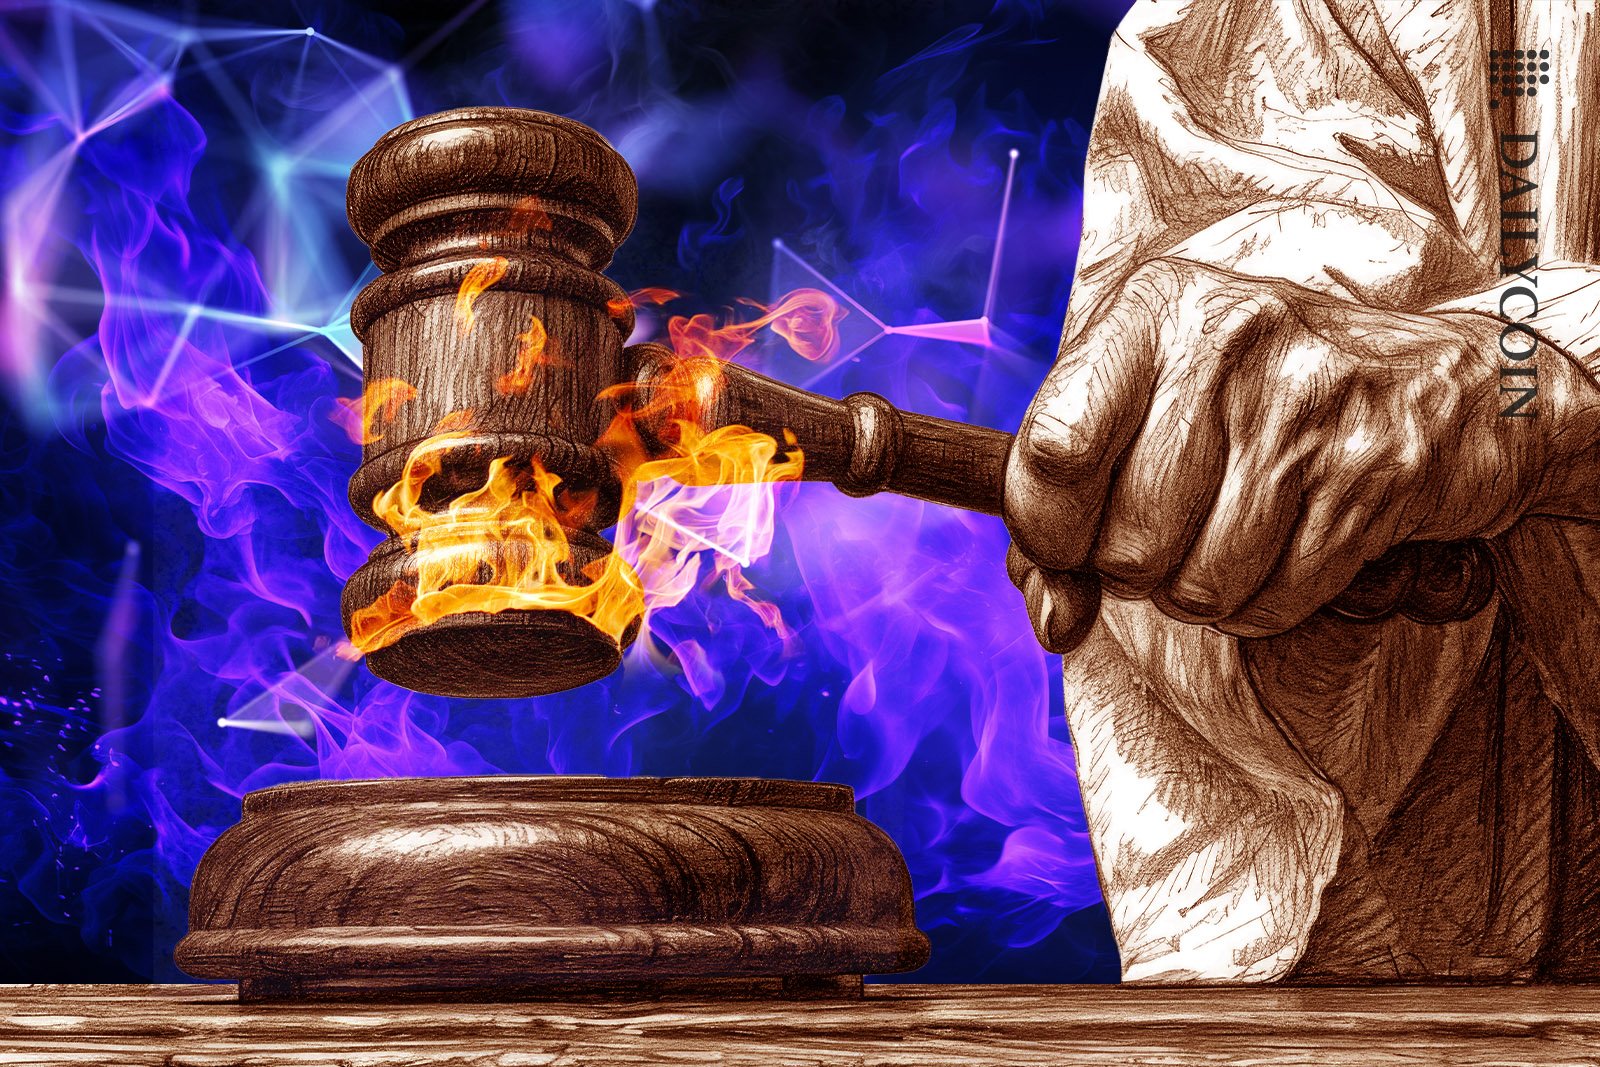 Judge banging his gavel thats on fire.